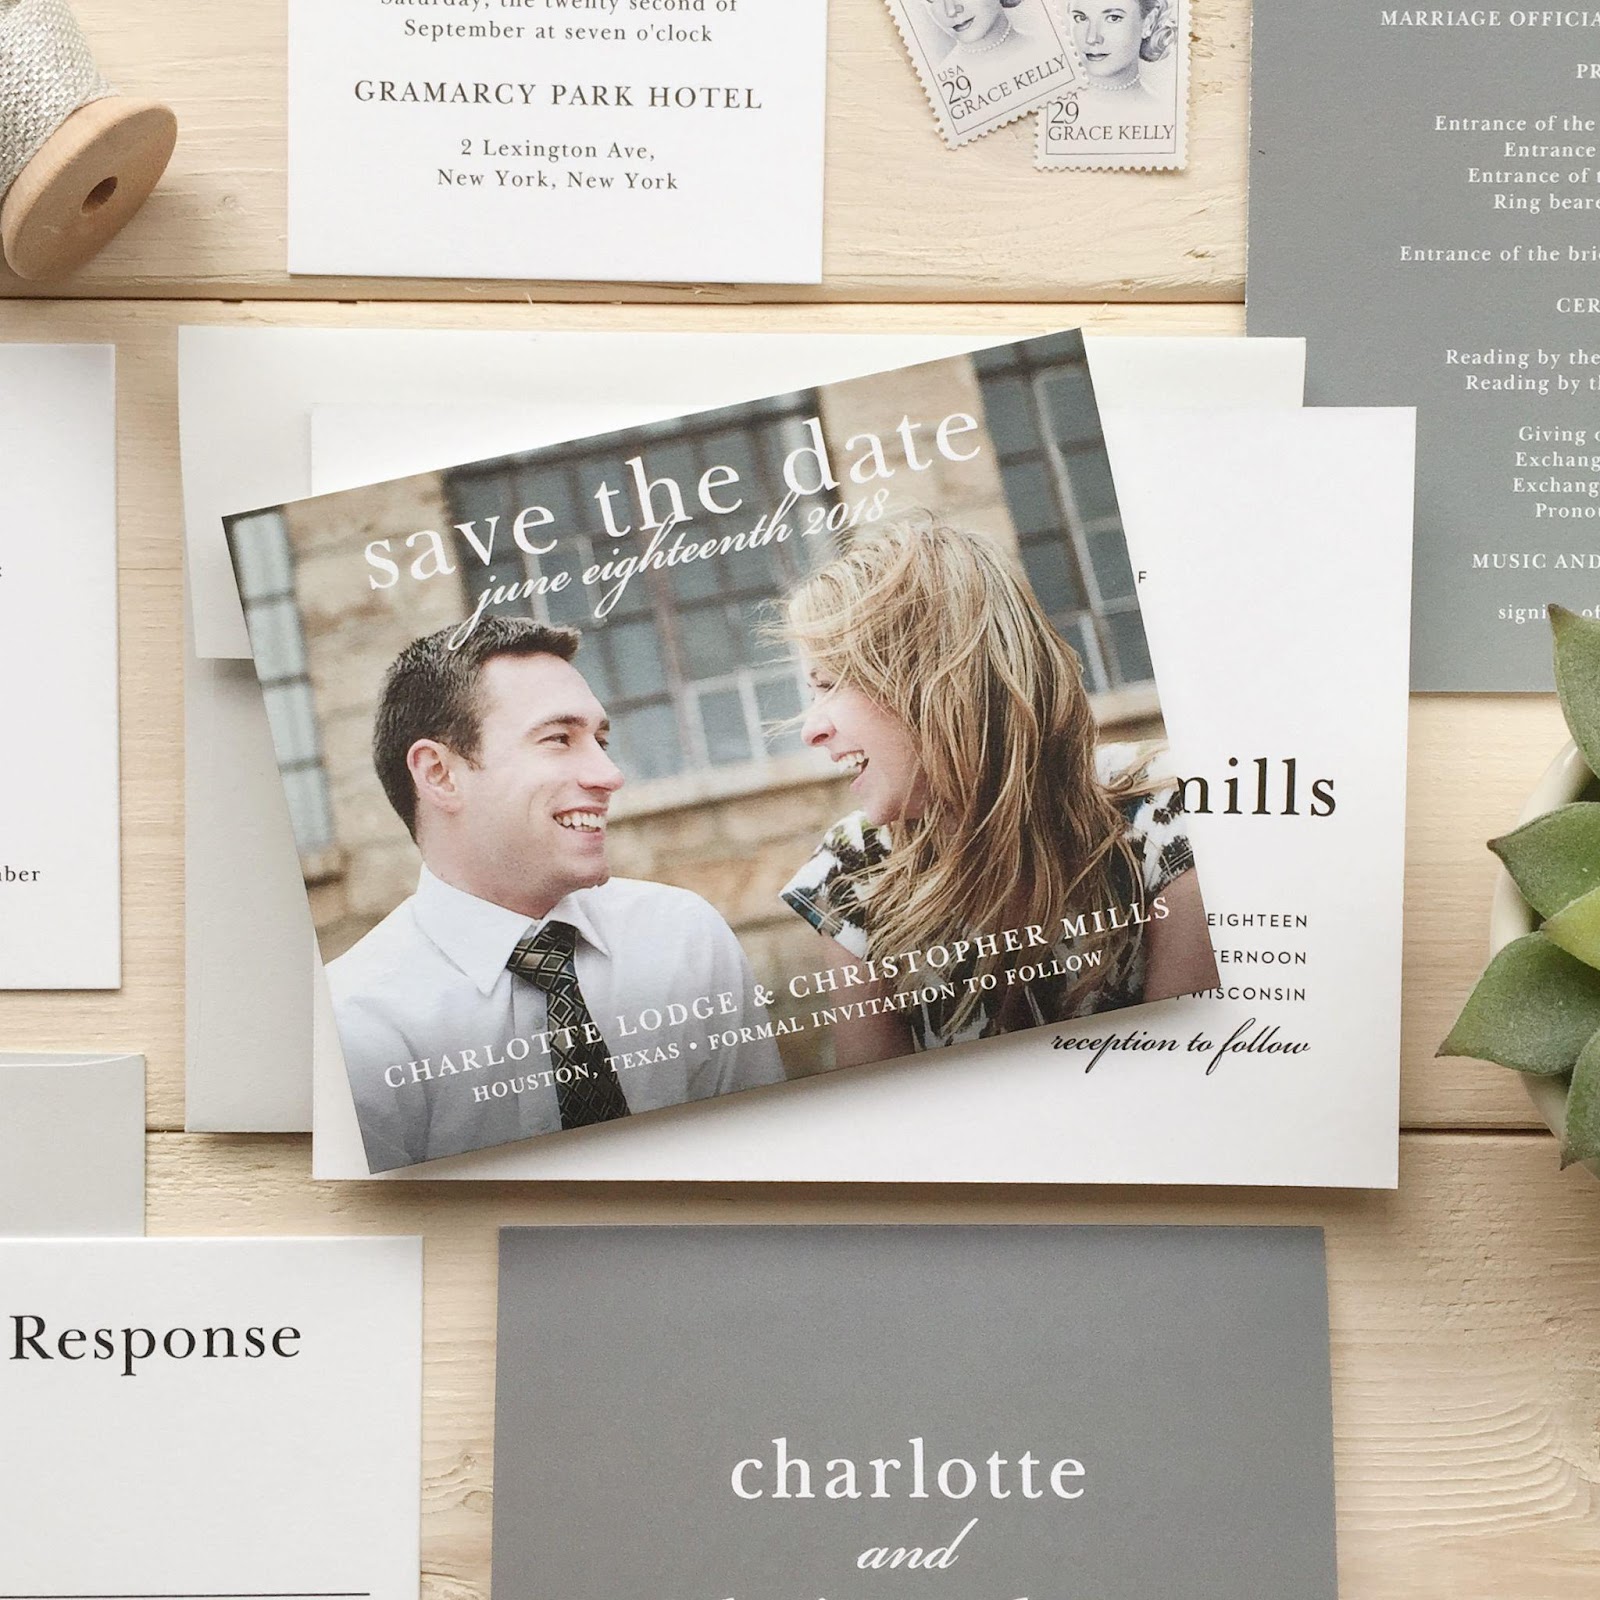 What Should a Nice Wedding Invitation and Save the Date Set Cost?